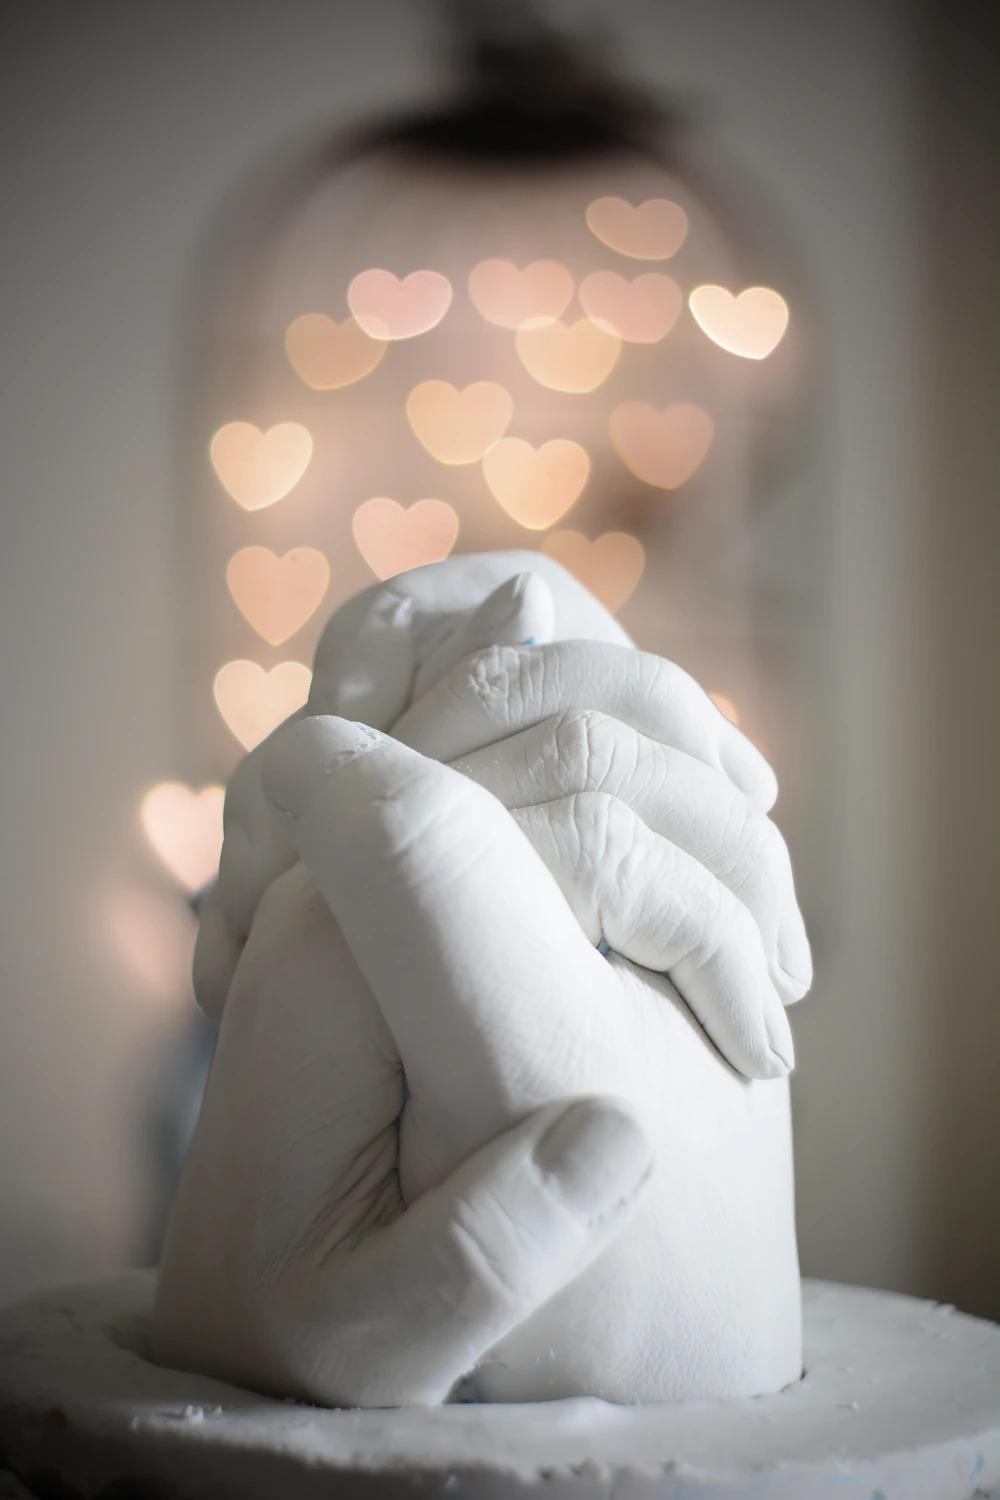 selective focus of holding hands figurine